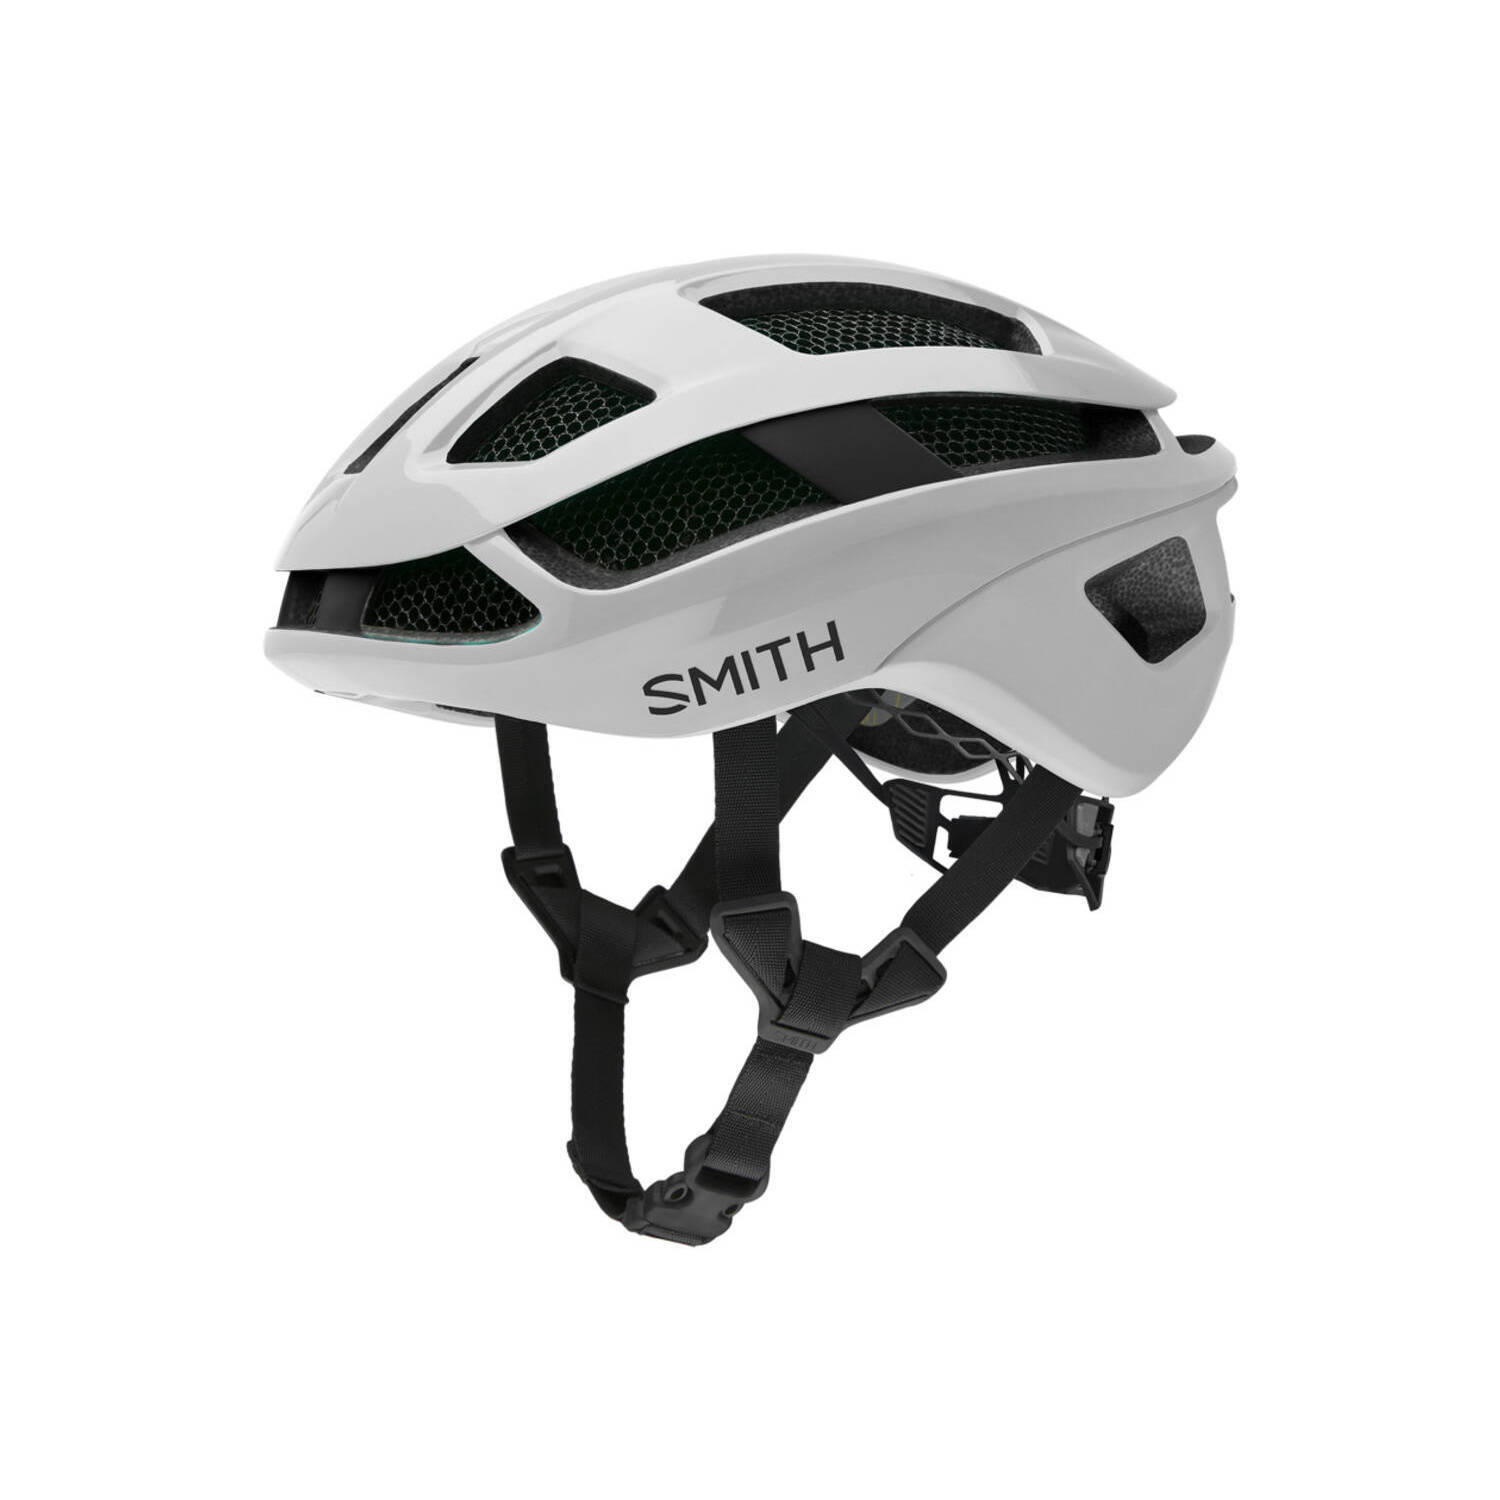 Smith trace helm mips matte